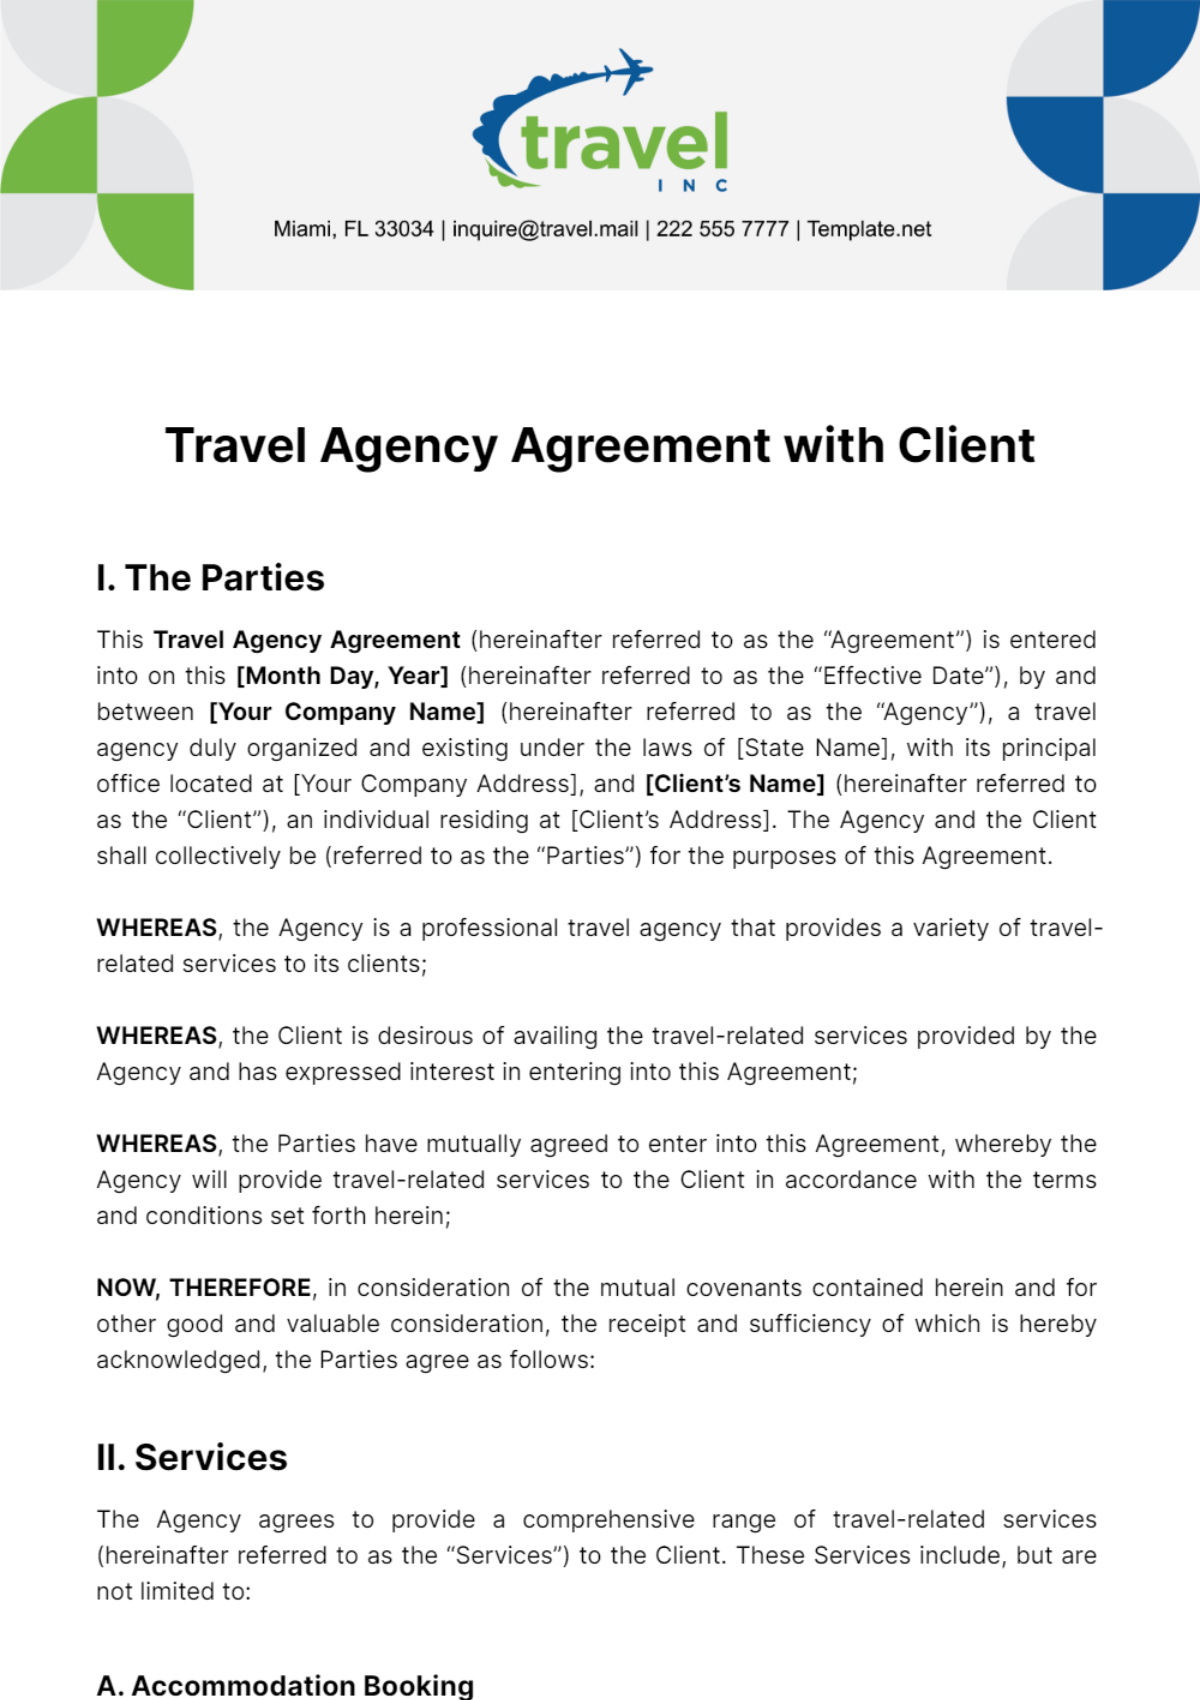 Free Travel Agency Agreement with Client Template